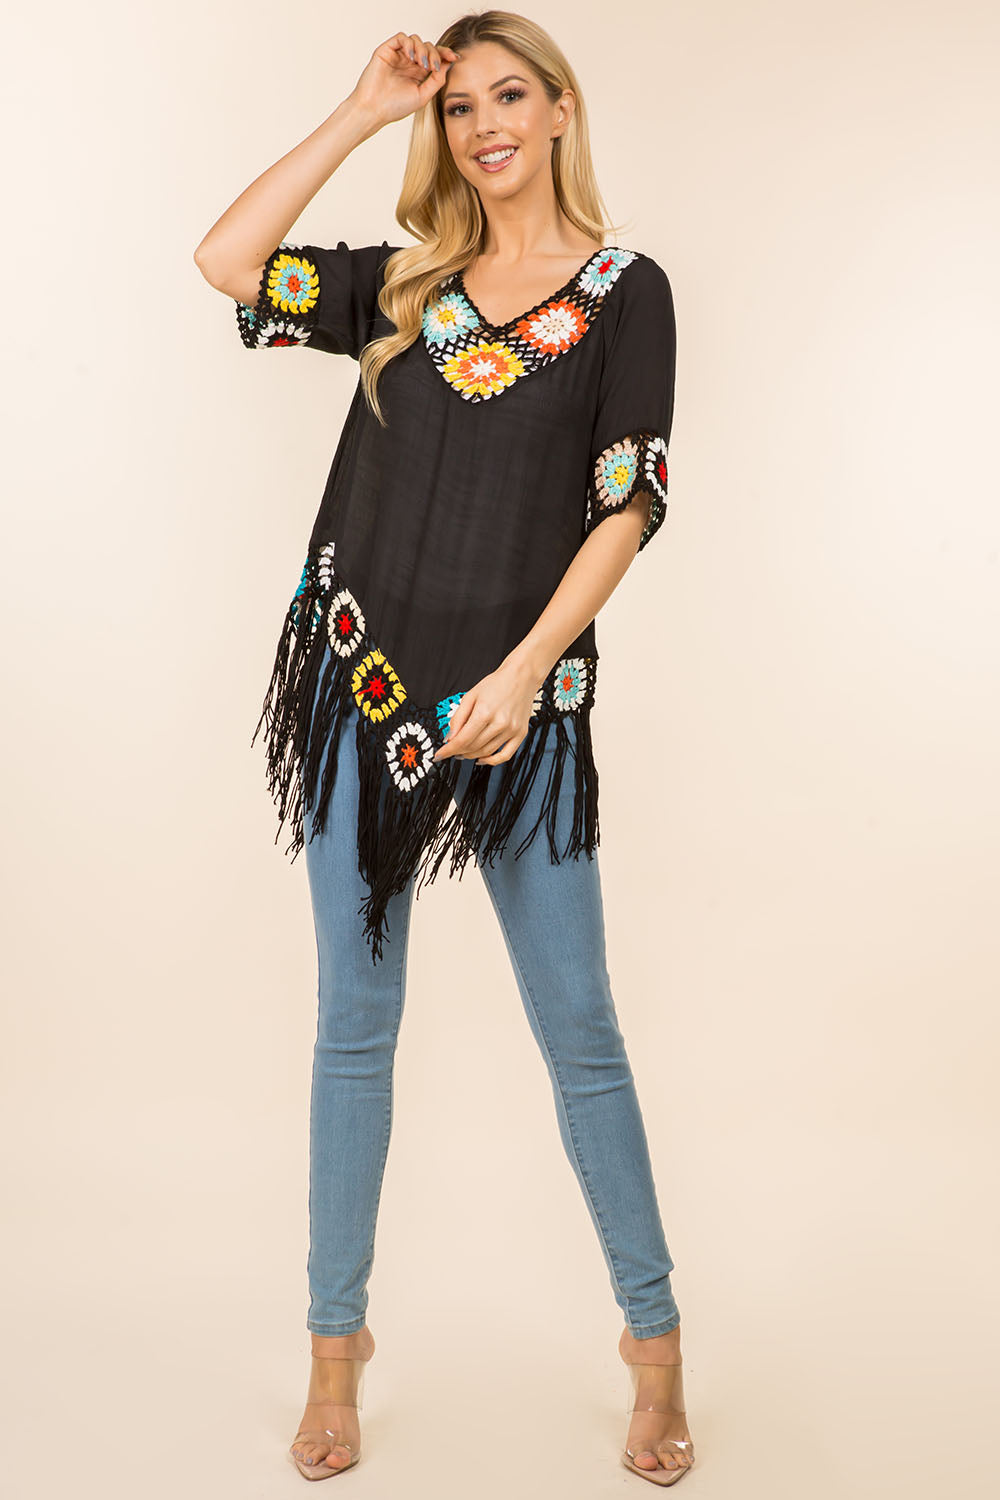 PP-4119 multi color crochet wearable with tassels